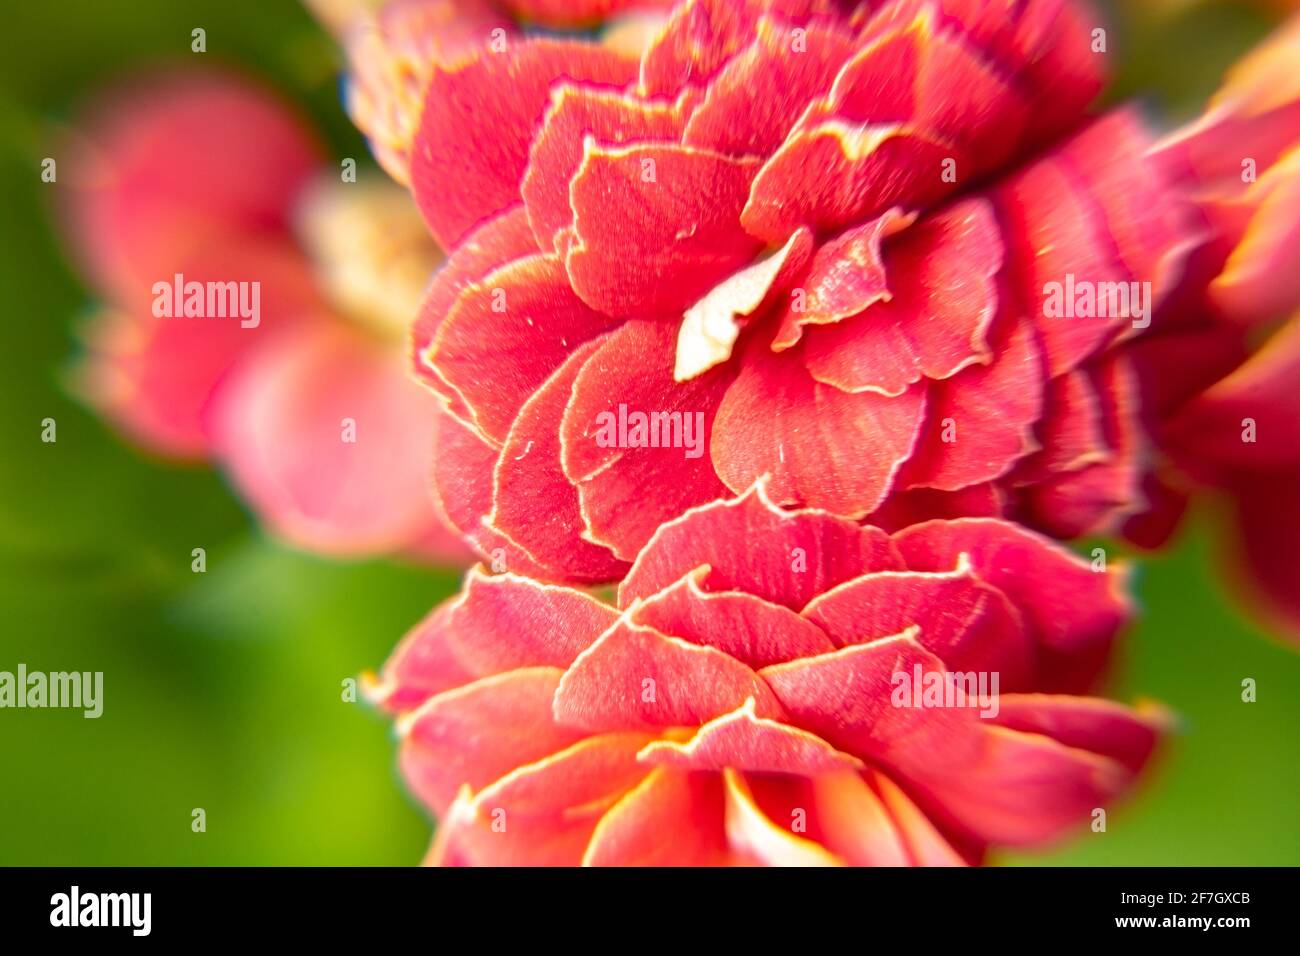 bright red indoor flower Kalanchoe Blossfeld shot close-up with selective focus Stock Photo